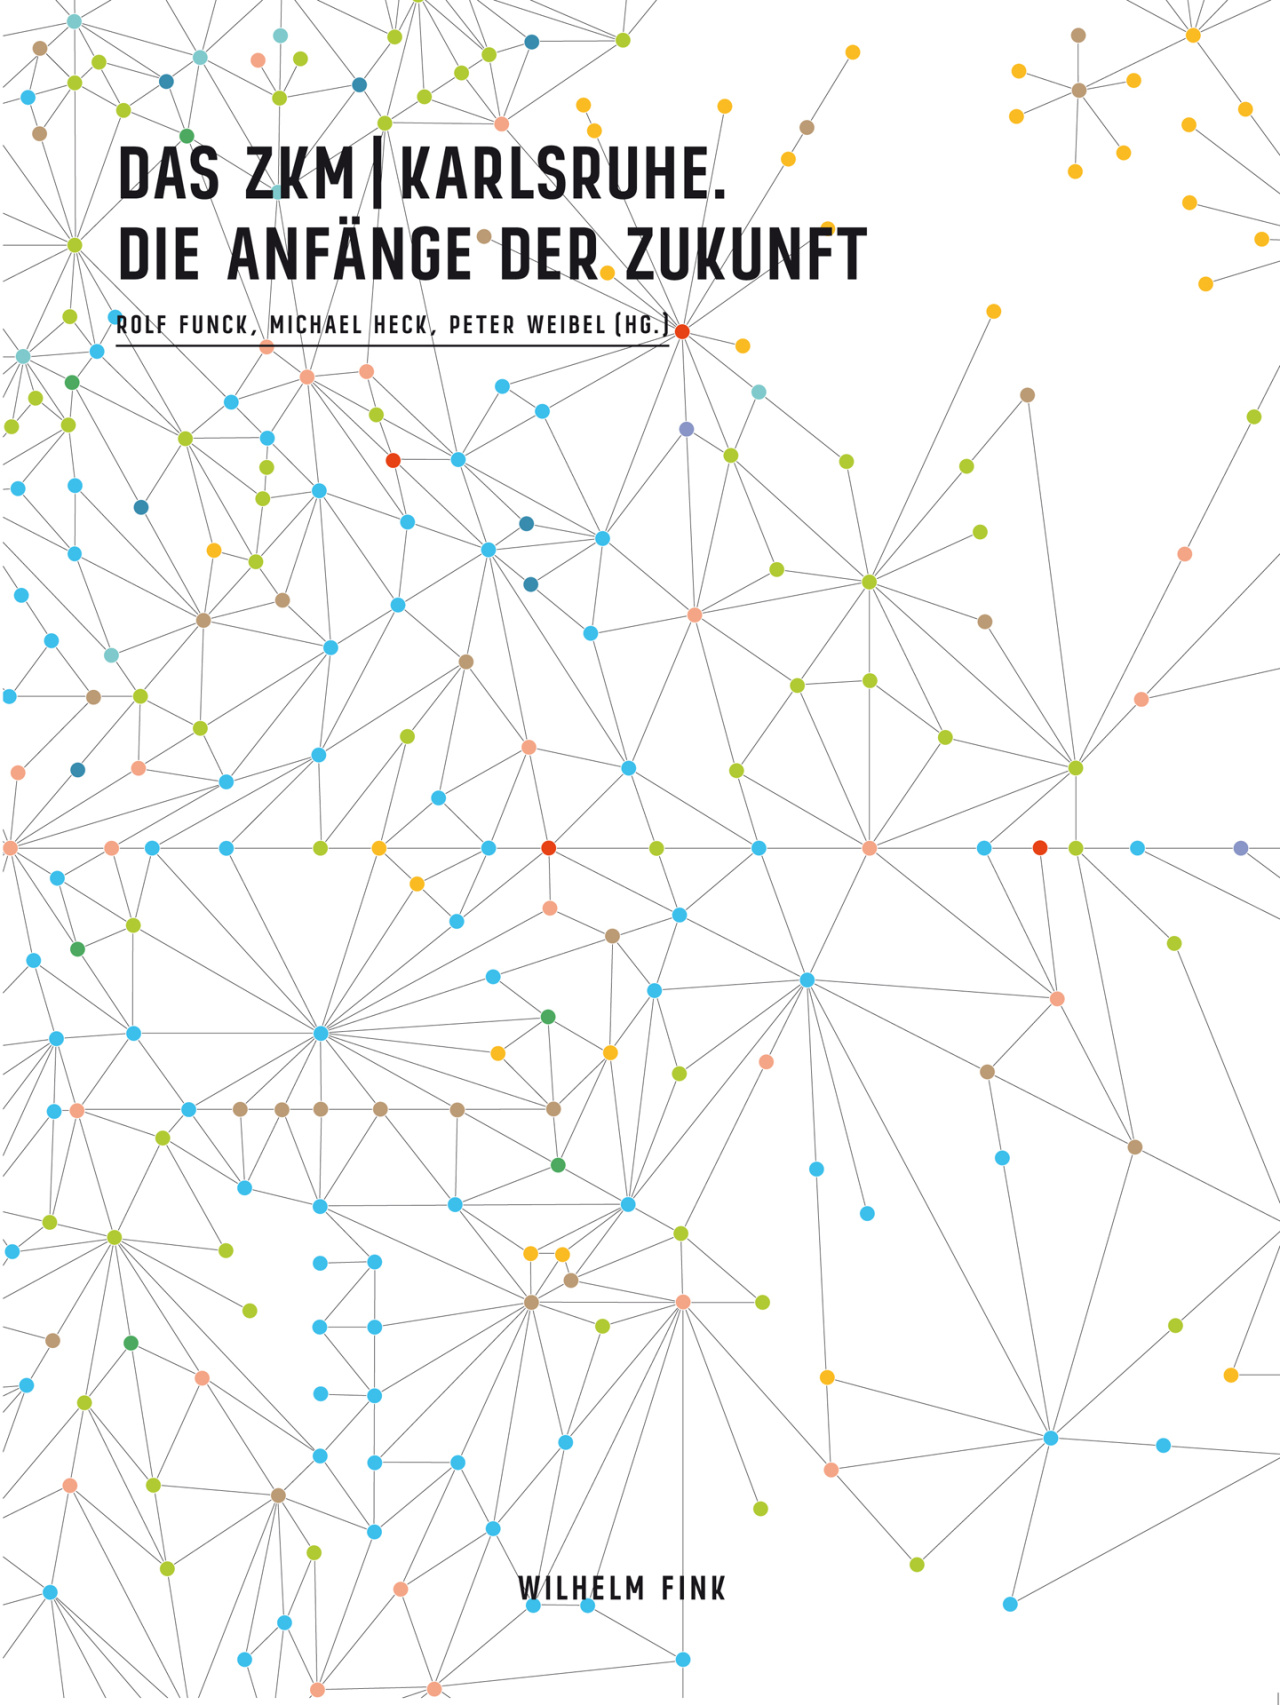 Cover of the publication »Das ZKM | Karlsruhe«